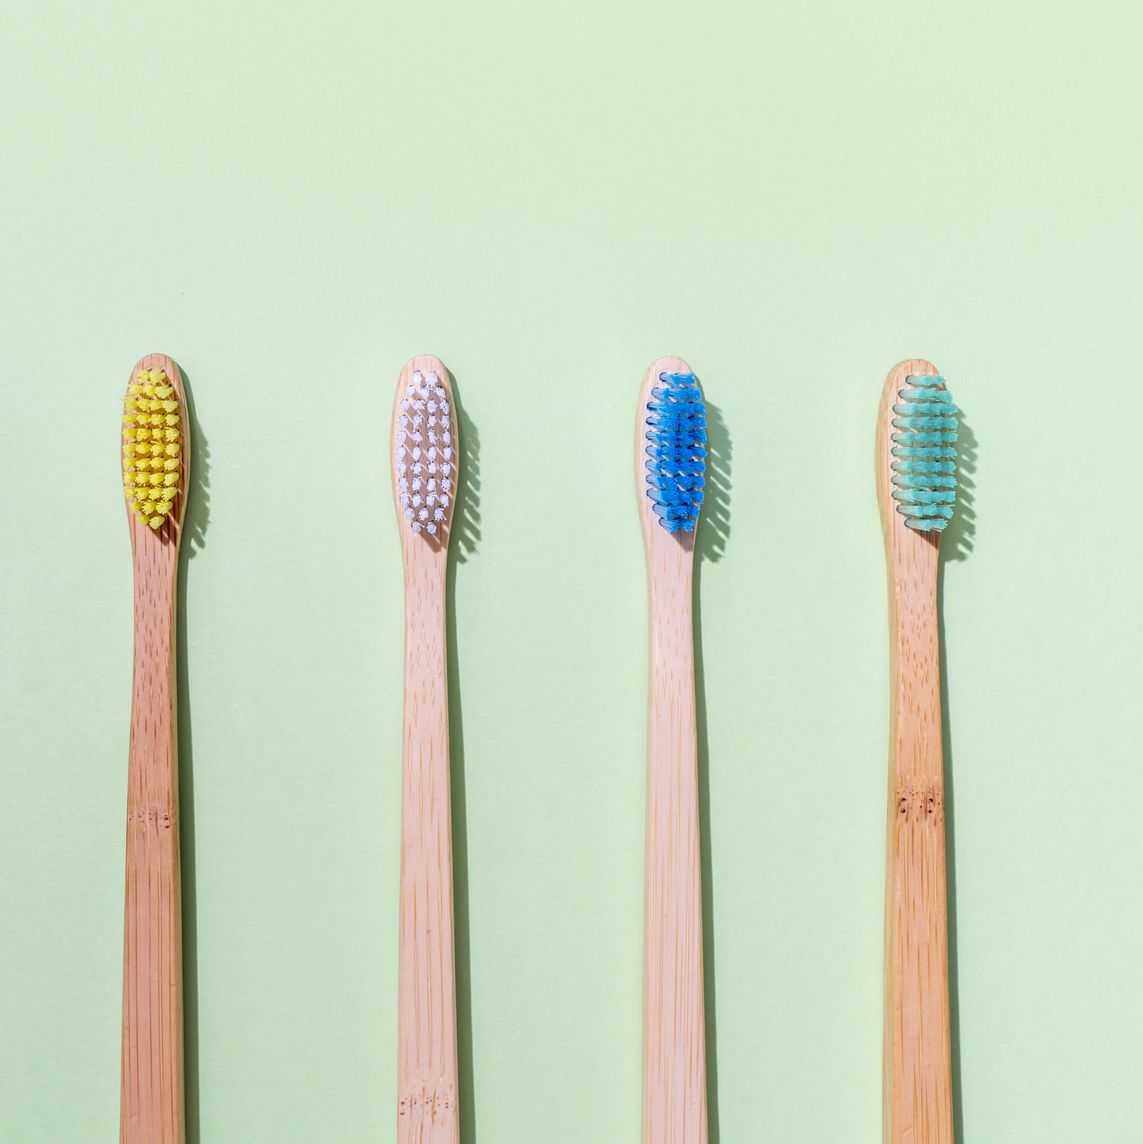 You May Need to Change Your Toothbrush More Often Than Every 3 Months